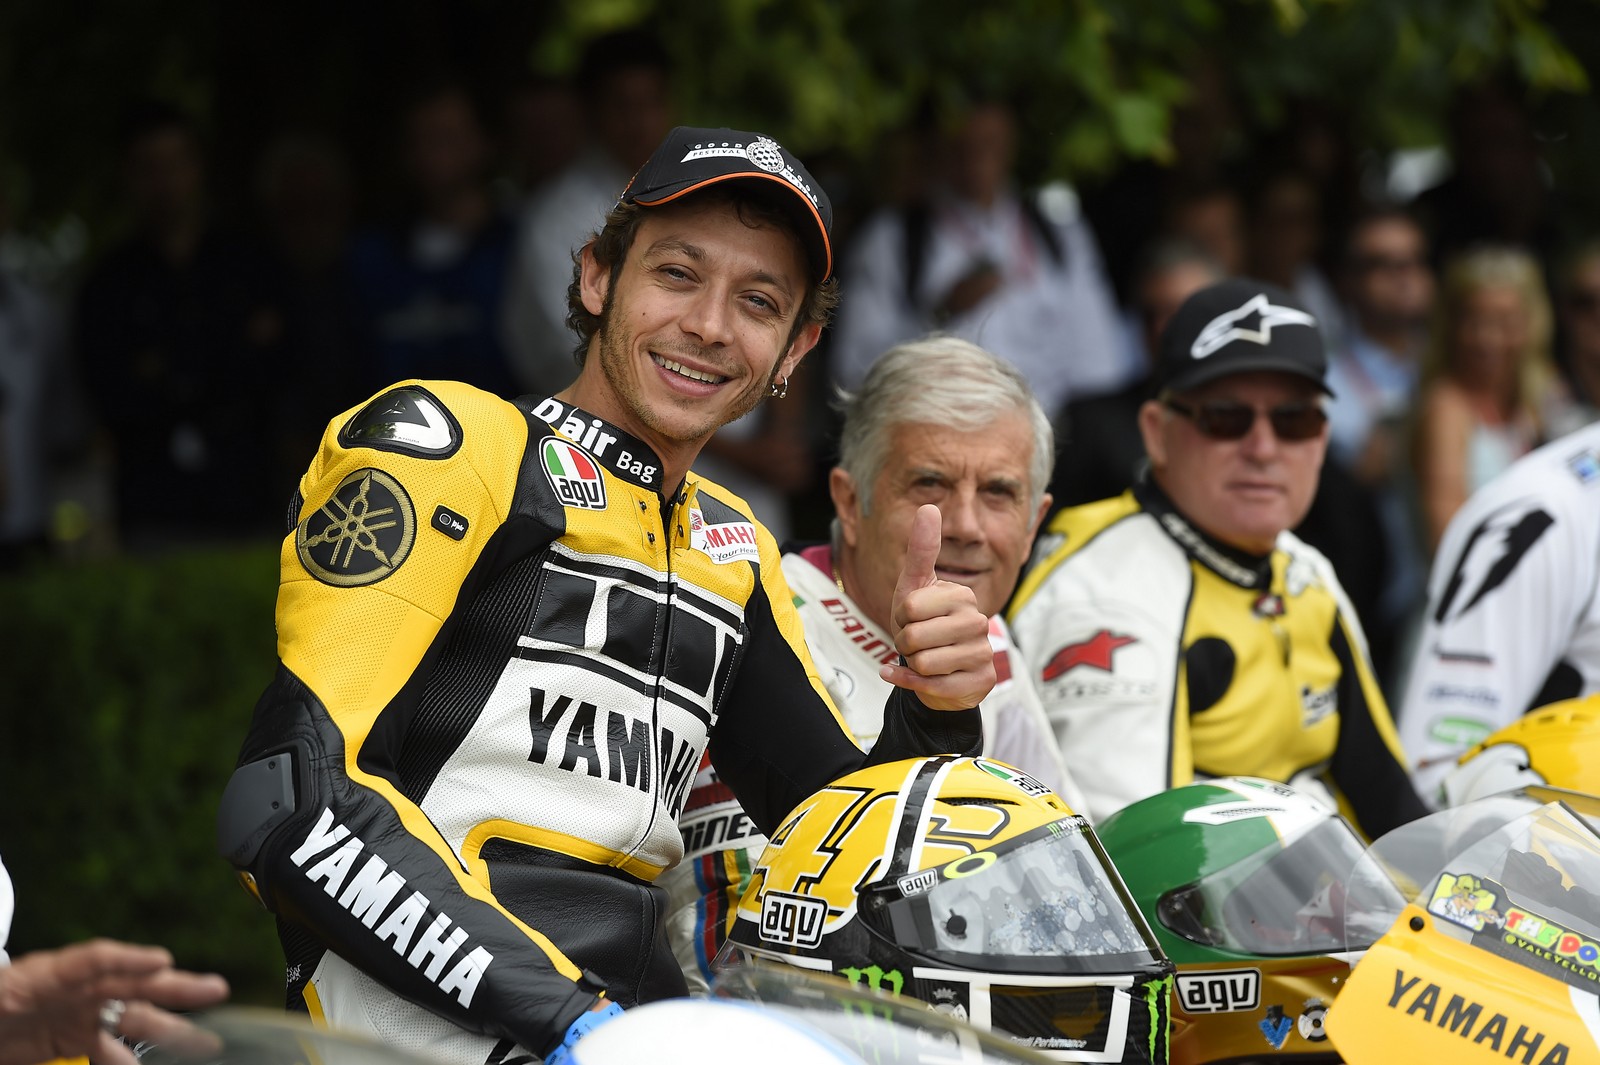 Rossi Goodwood Festival of Speed